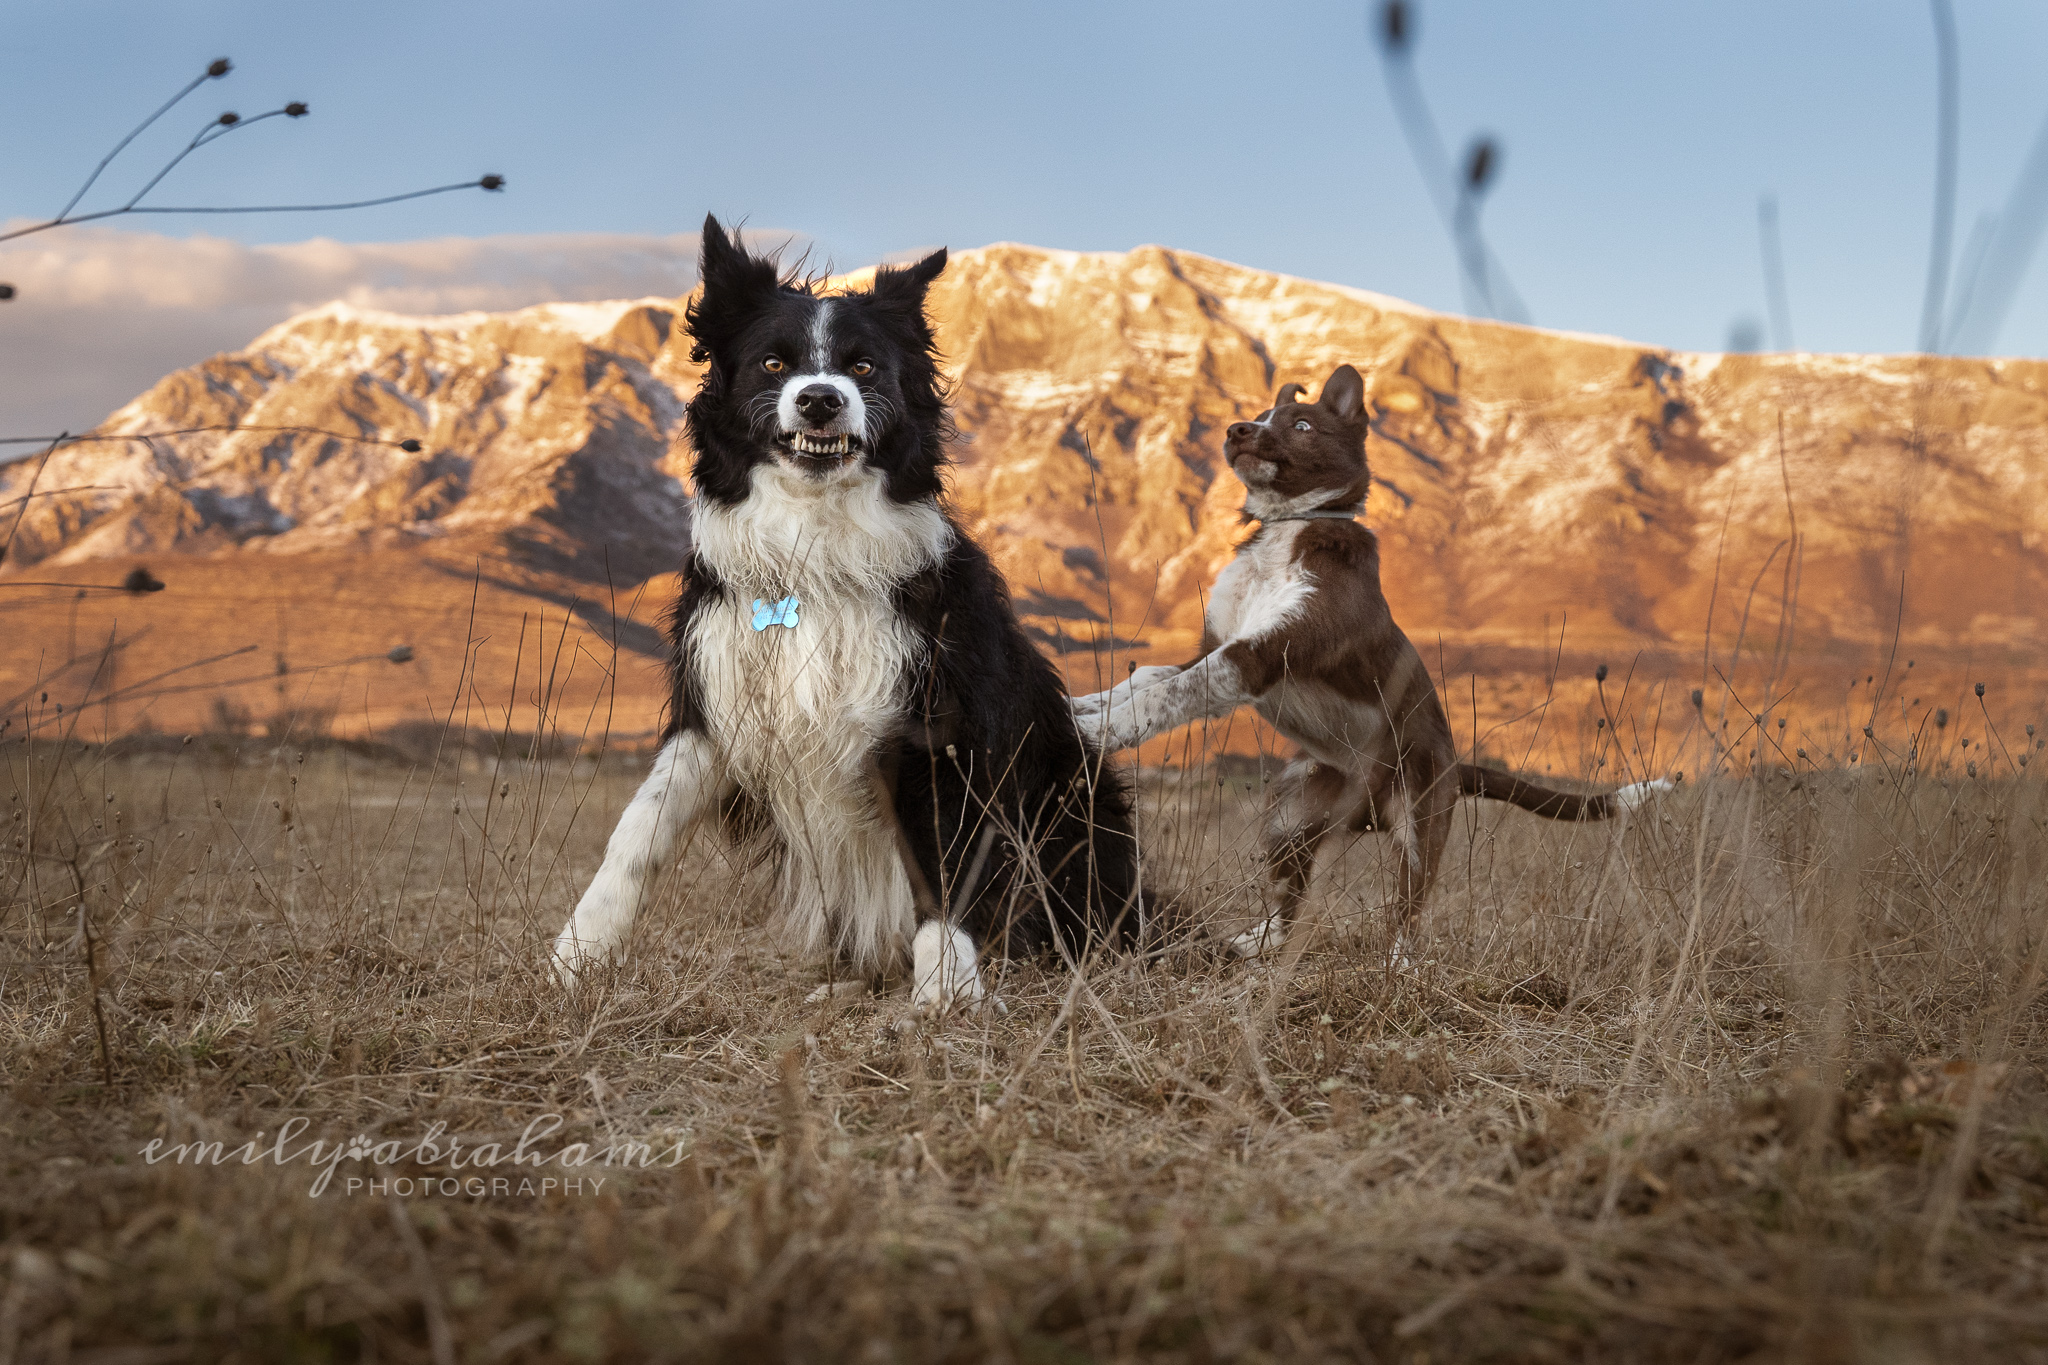 Two border collies, one is a young puppy who is pushing his front paws on the older one's back. The older one has a snarl on his face, and the puppy is looking shocked. There is a mountain lit by golden light behind them